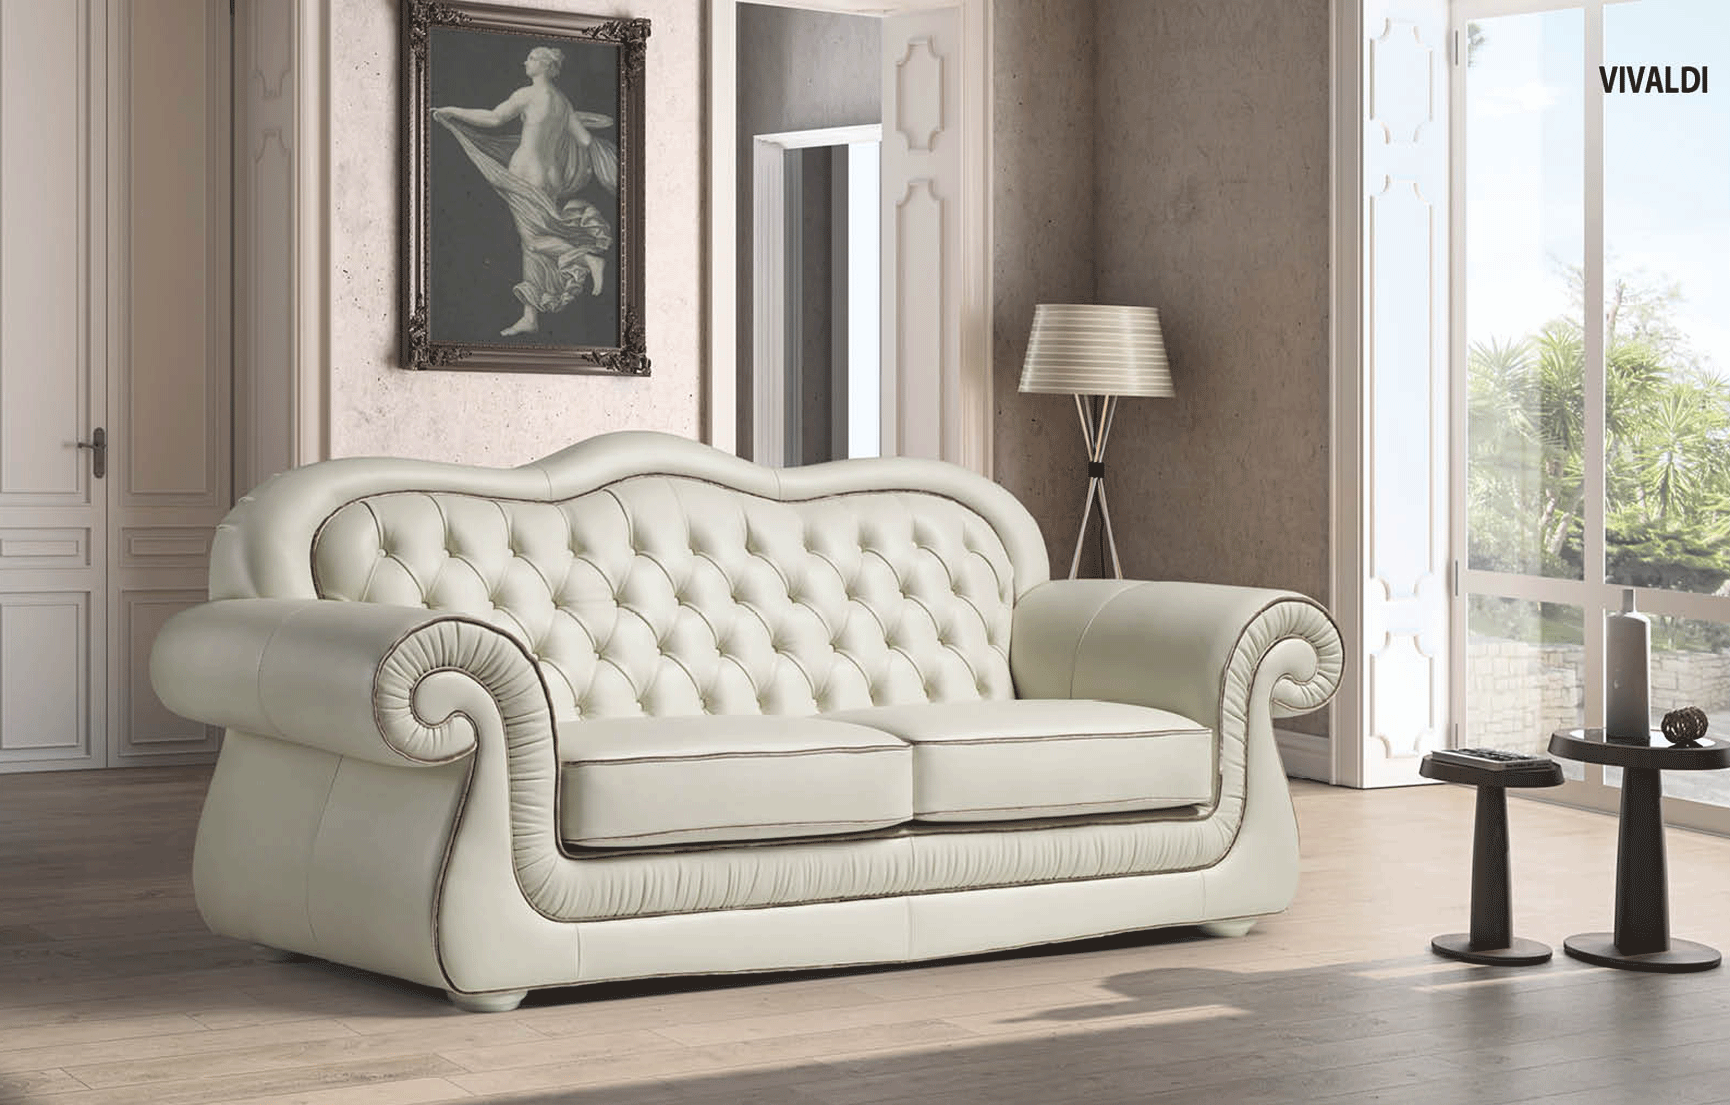 Brands SWH Classic Living Special Order Vivaldi